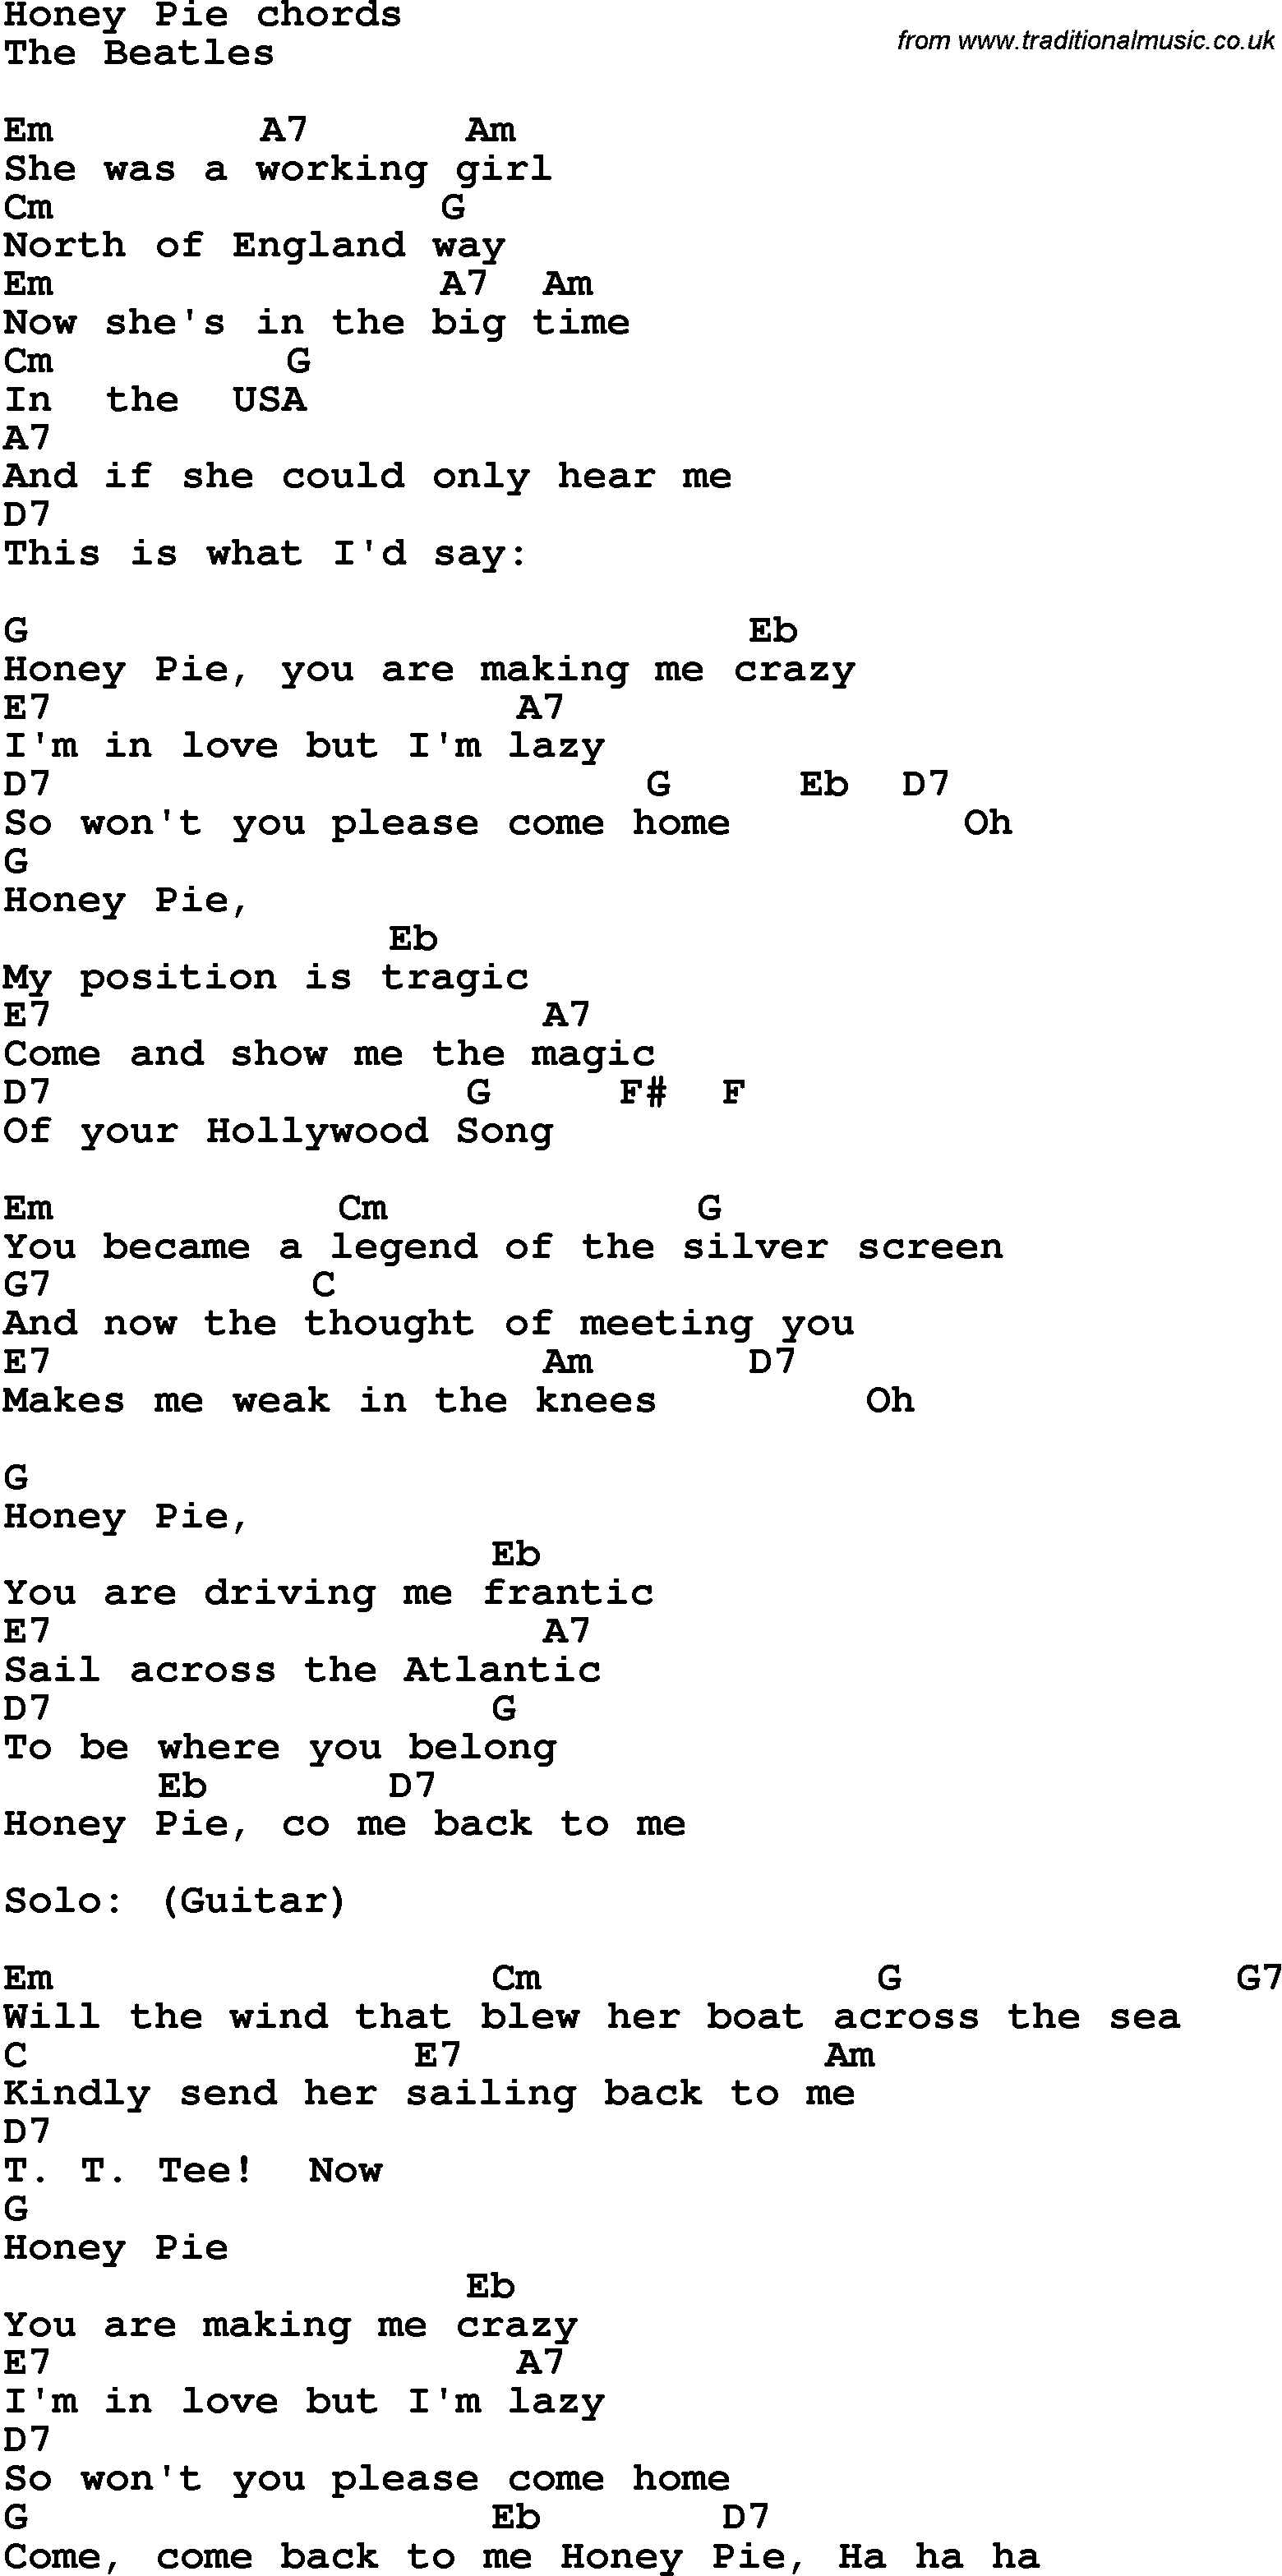 Song Lyrics with guitar chords for Honey Pie - The Beatles